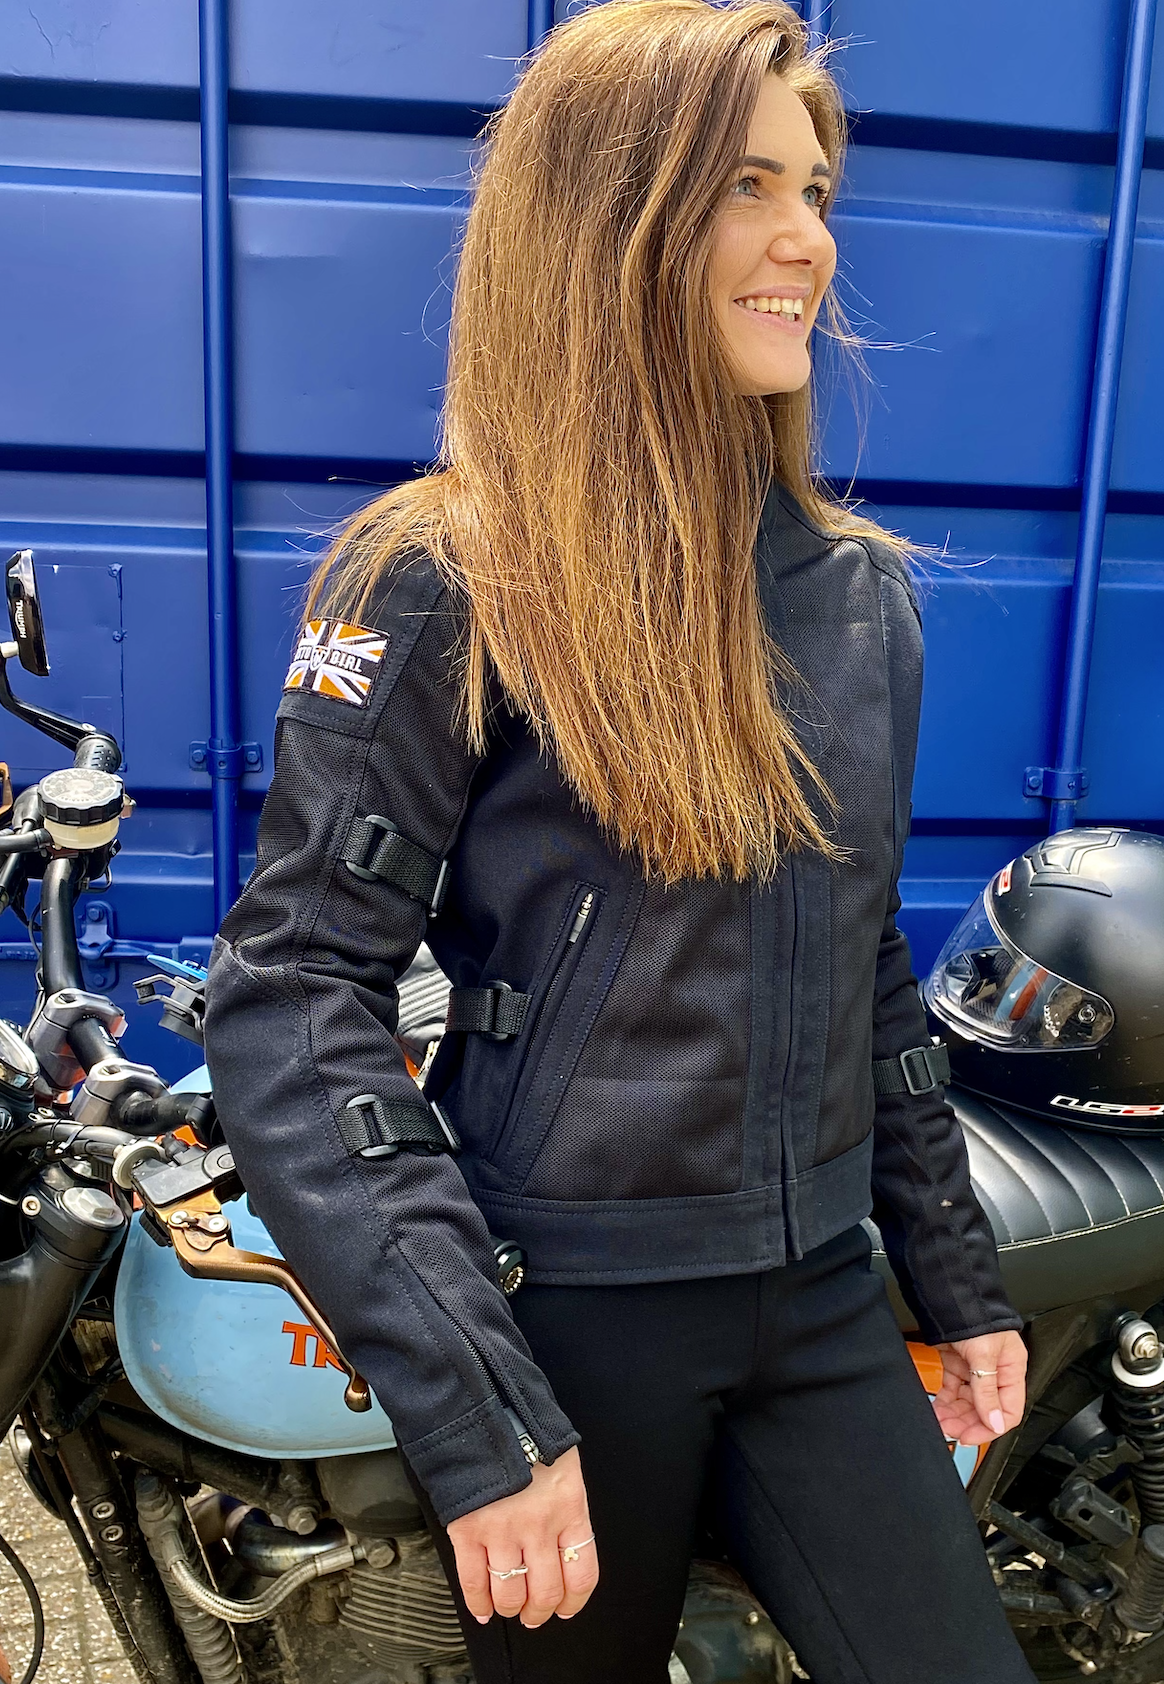 A smiling woman wearing Black summer mesh women's motorcycle jacket with Motogirl patch